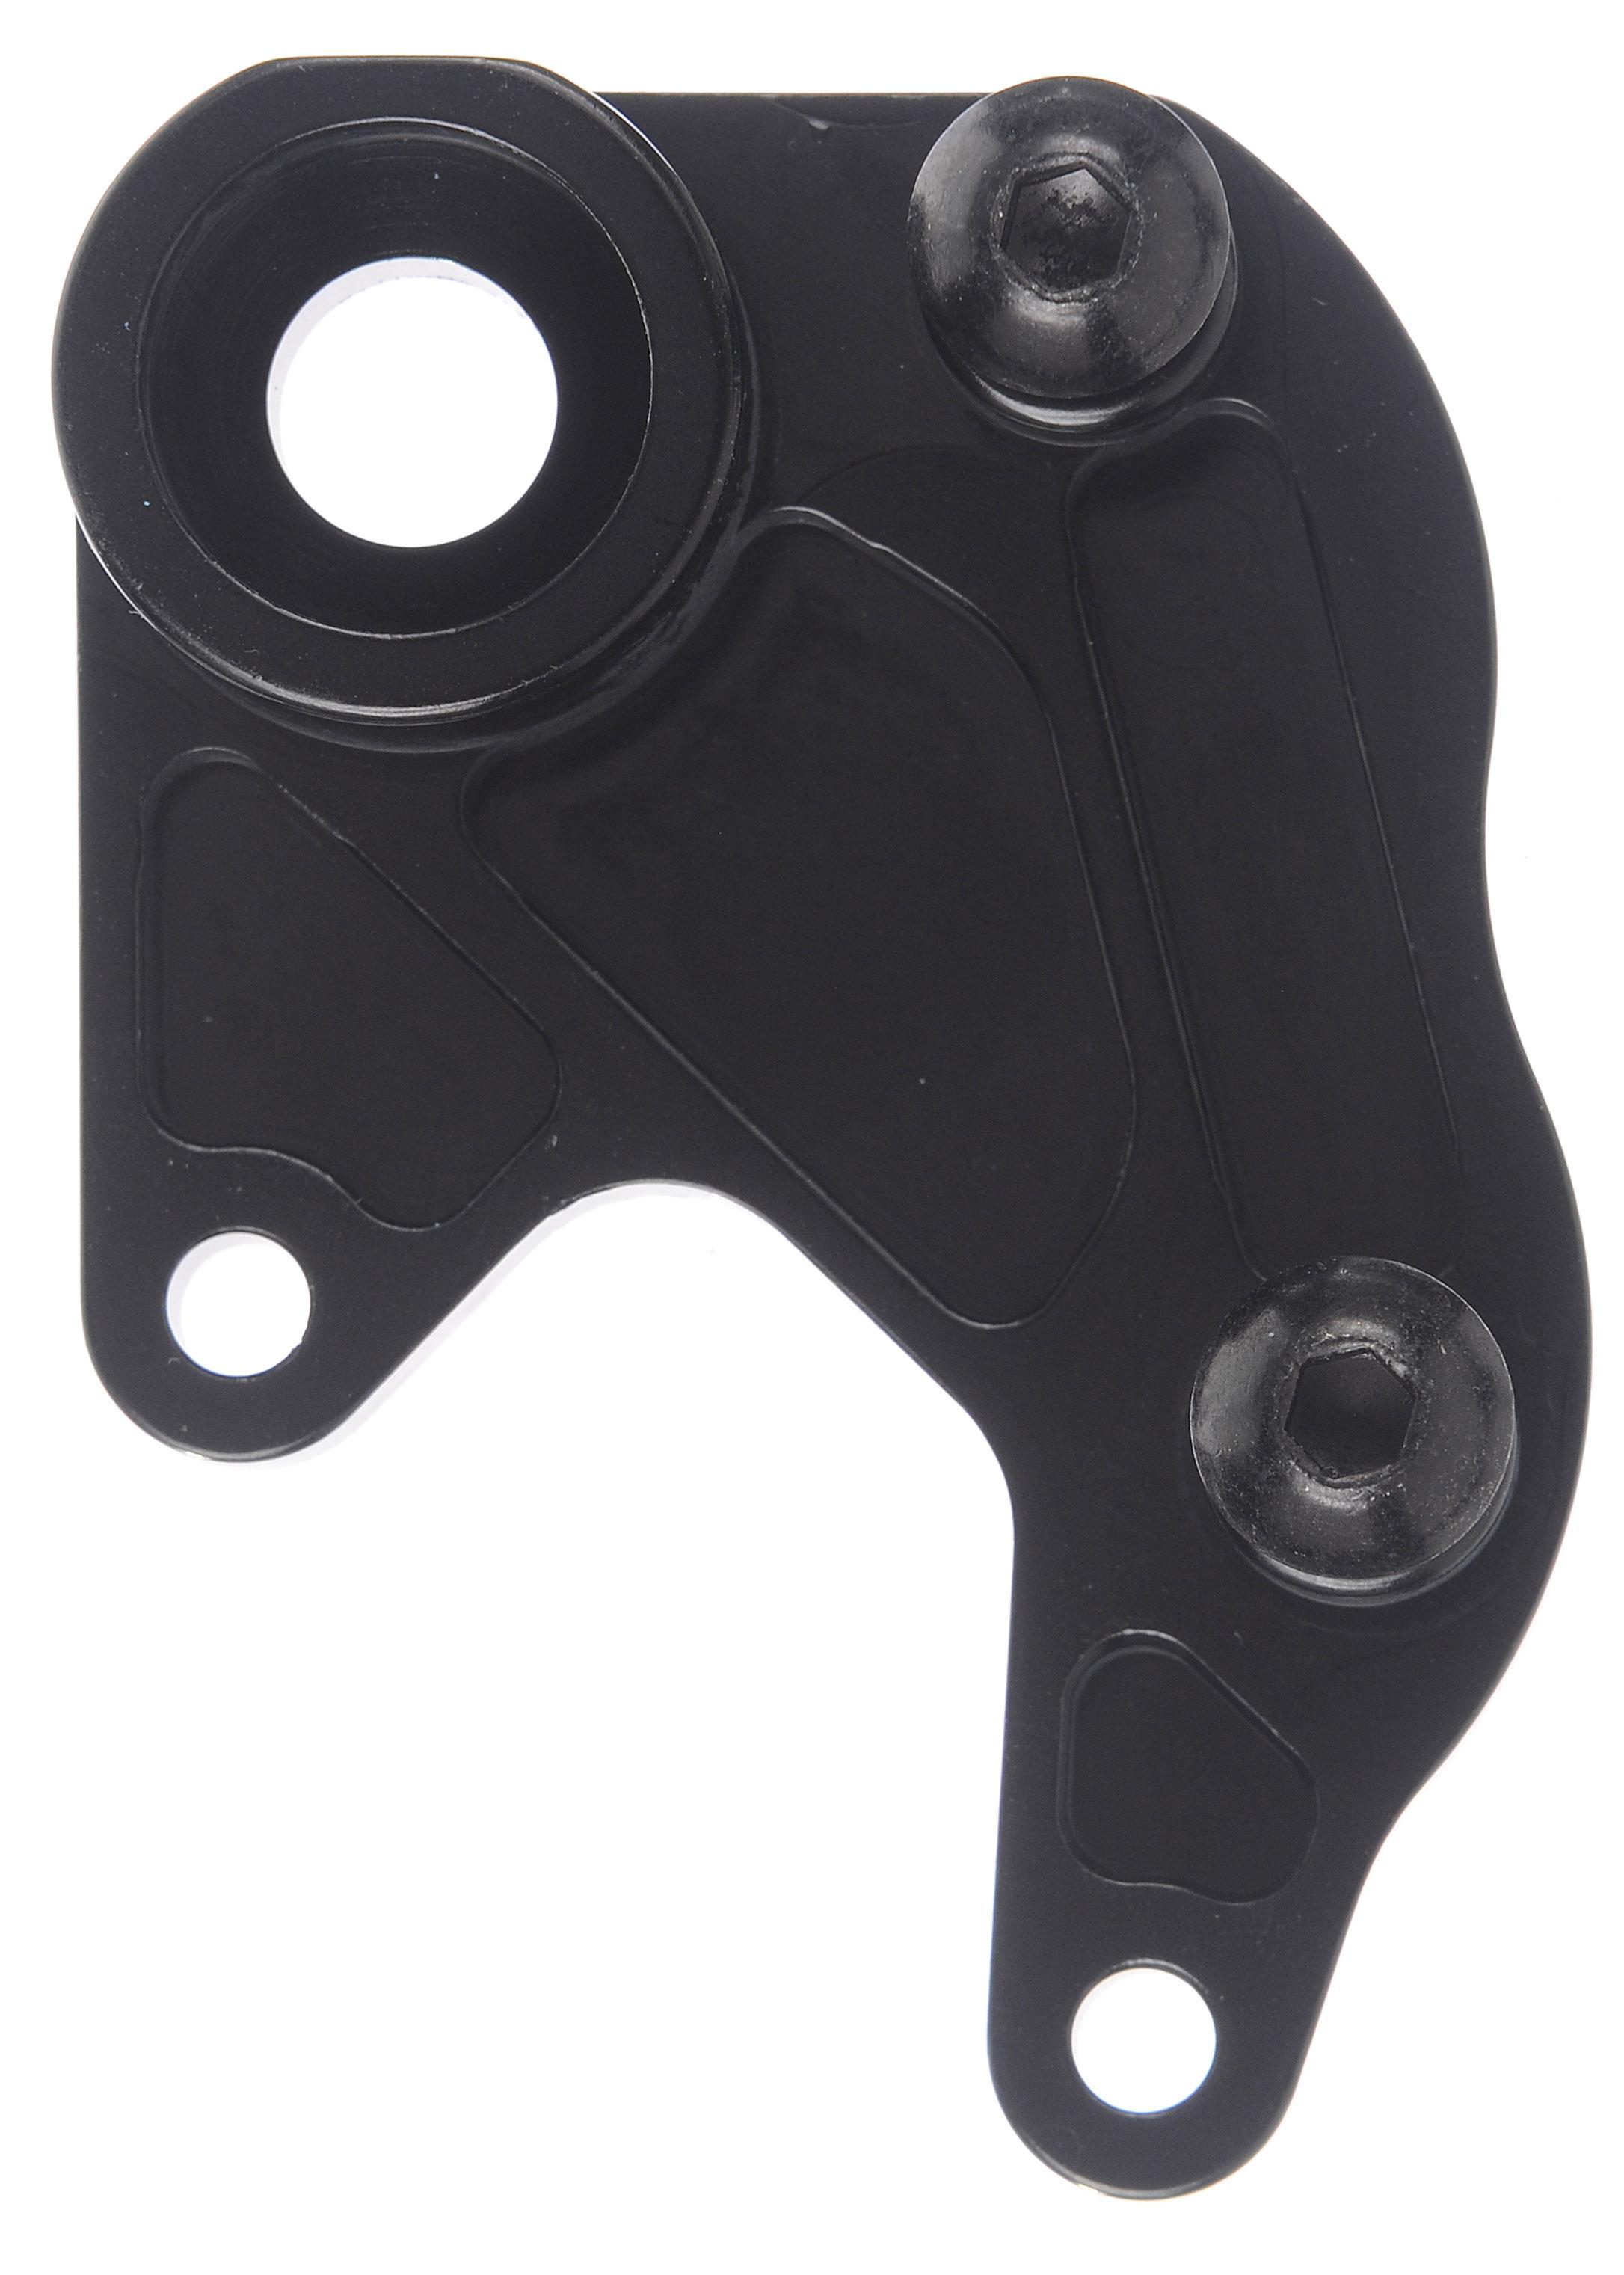 Nukeproof Snap Syntace Dropout - Neutral